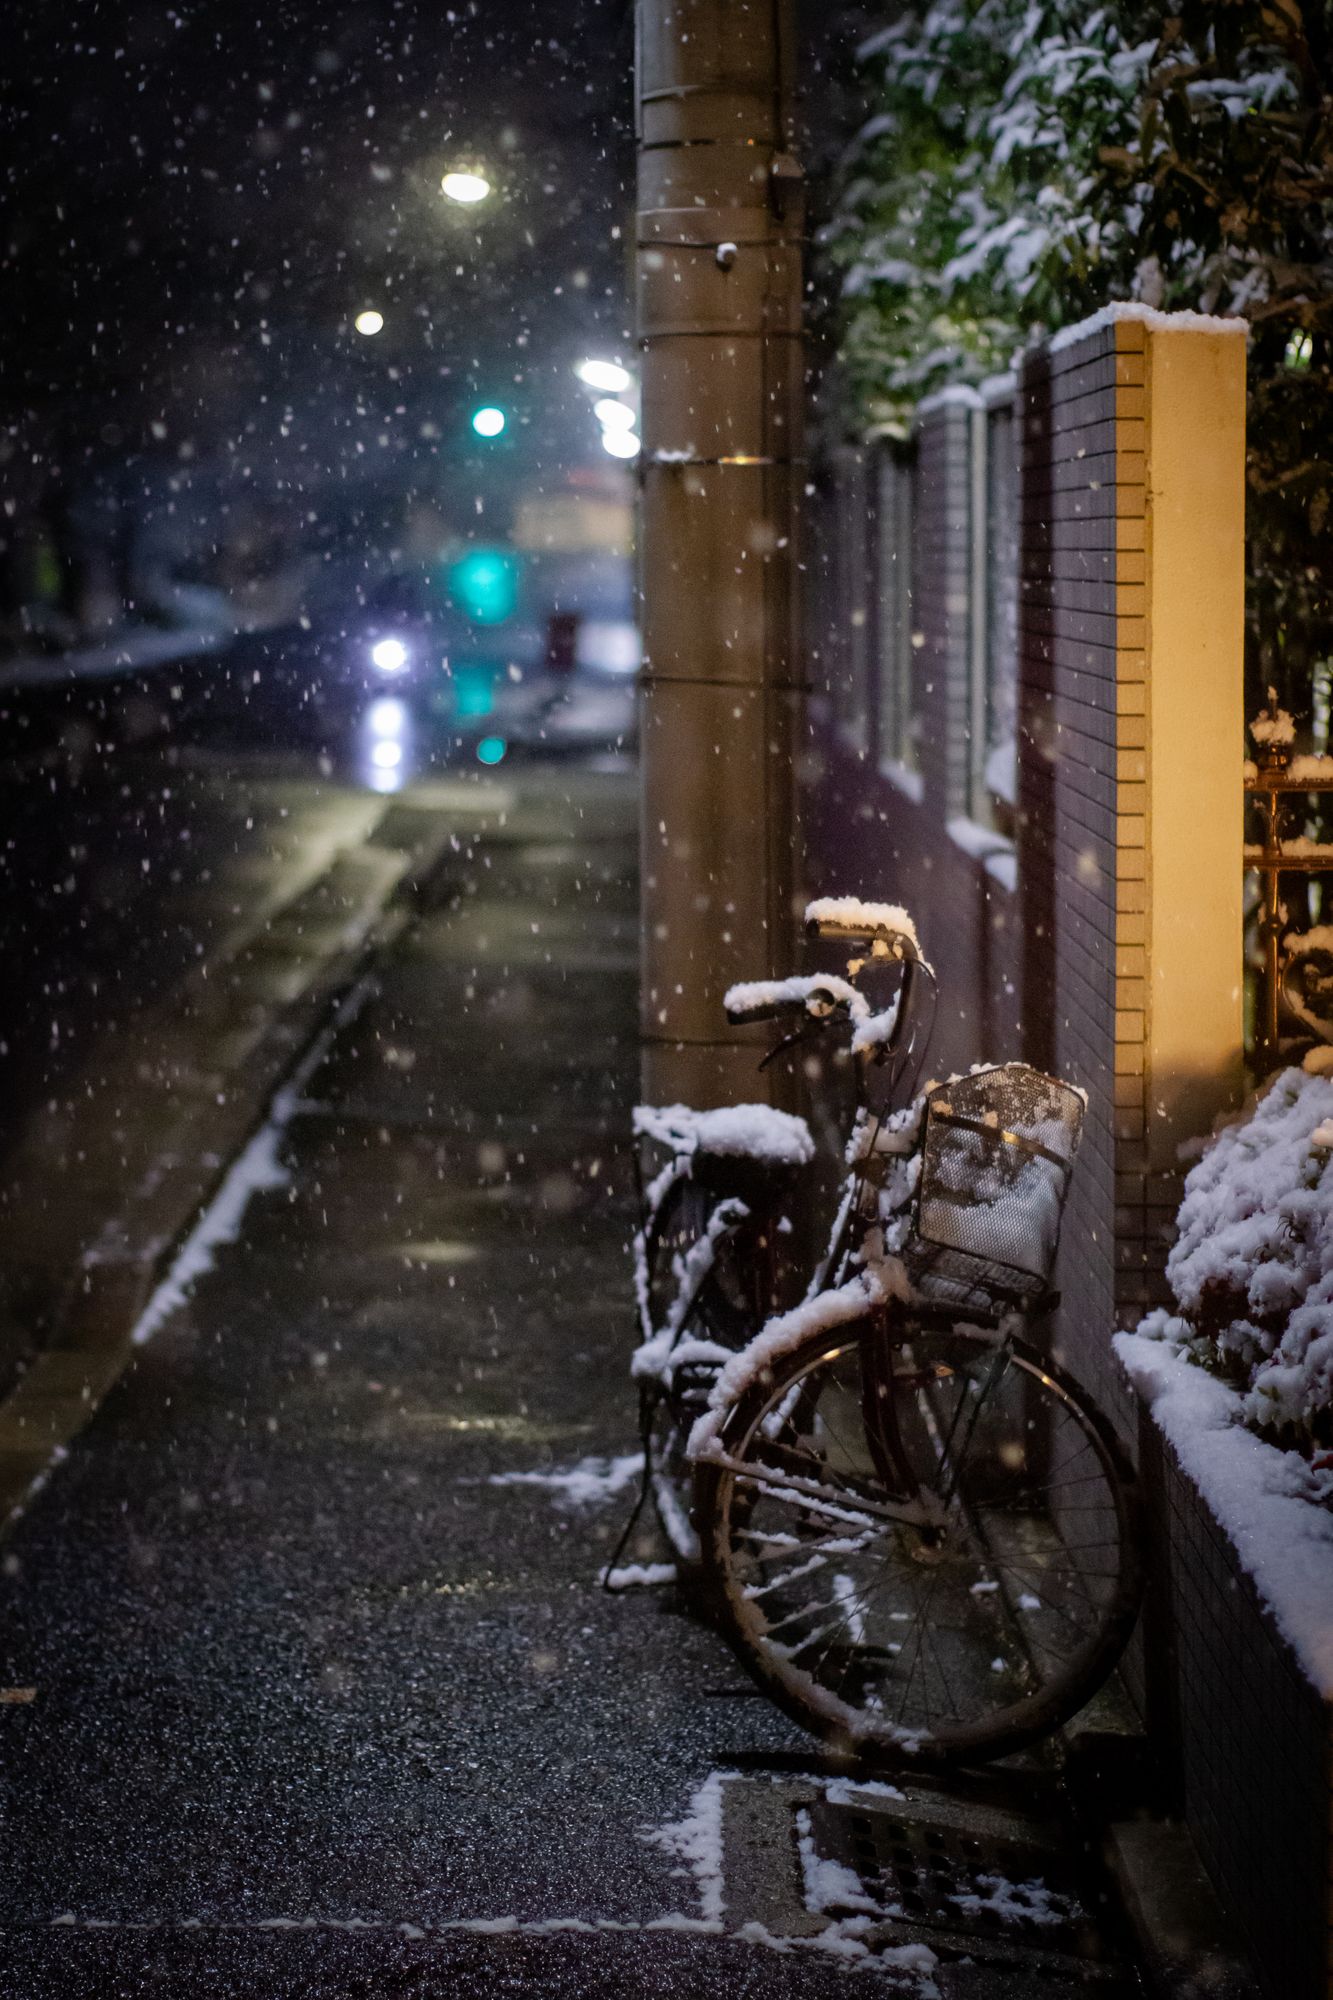 Snow piling up on a bike, starting to fill its attached basket. In the background part of a wet street is visible, with a green traffic light visible in the distance.